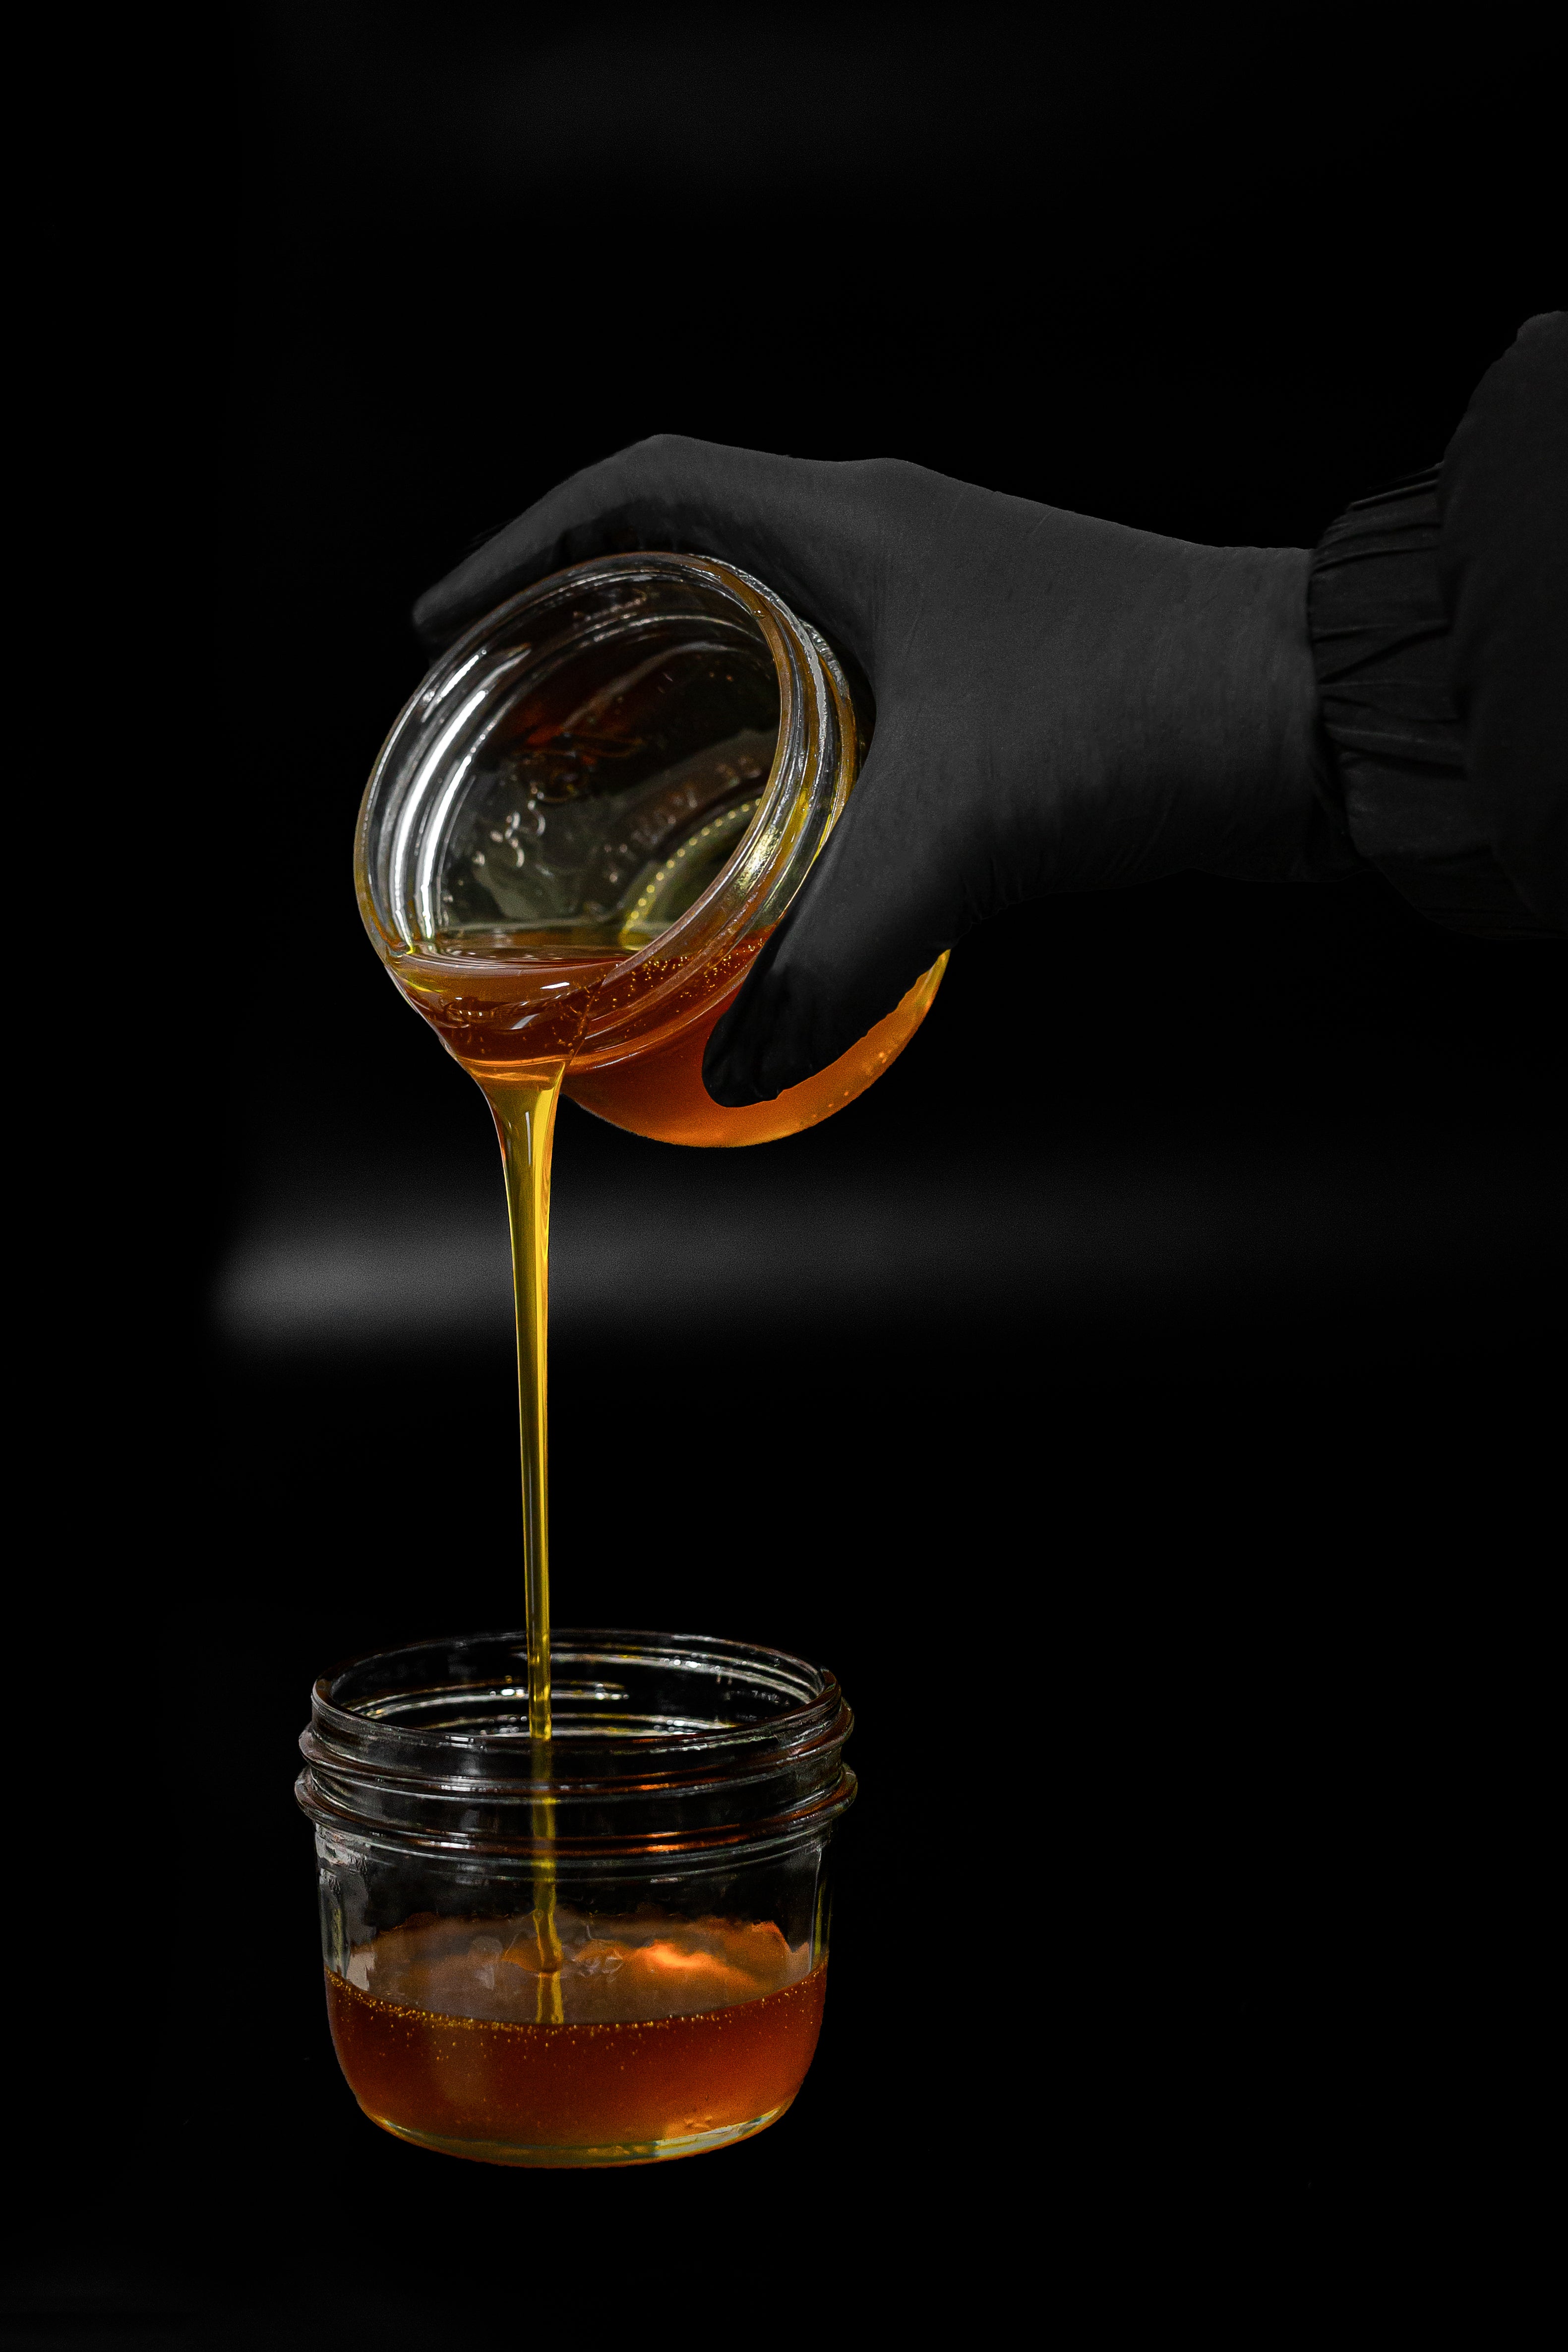 Cannabis distillate for weed vape pods is being poured from one glass jar to another by someone wearing black gloves.